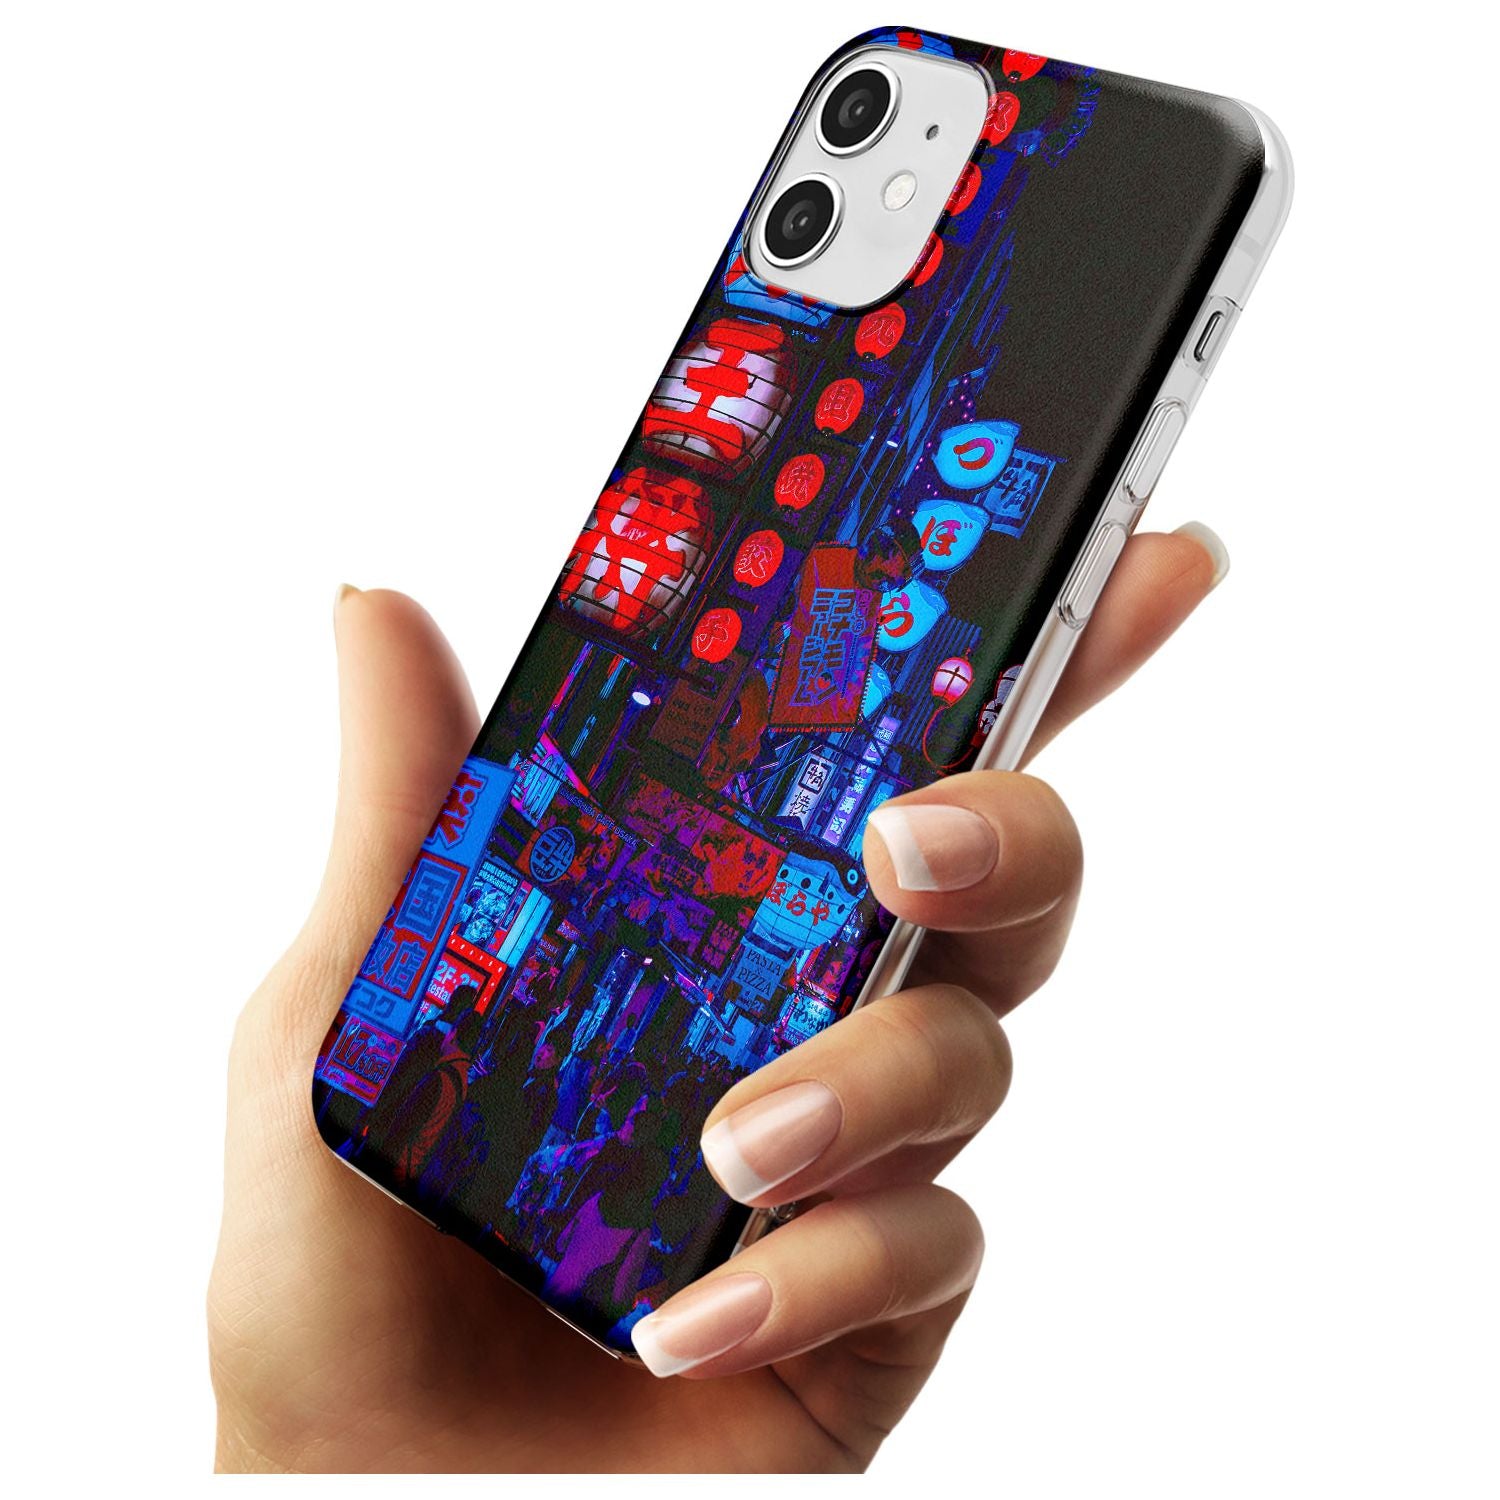 Red & Turquoise - Neon Cities Photographs Slim TPU Phone Case for iPhone 11